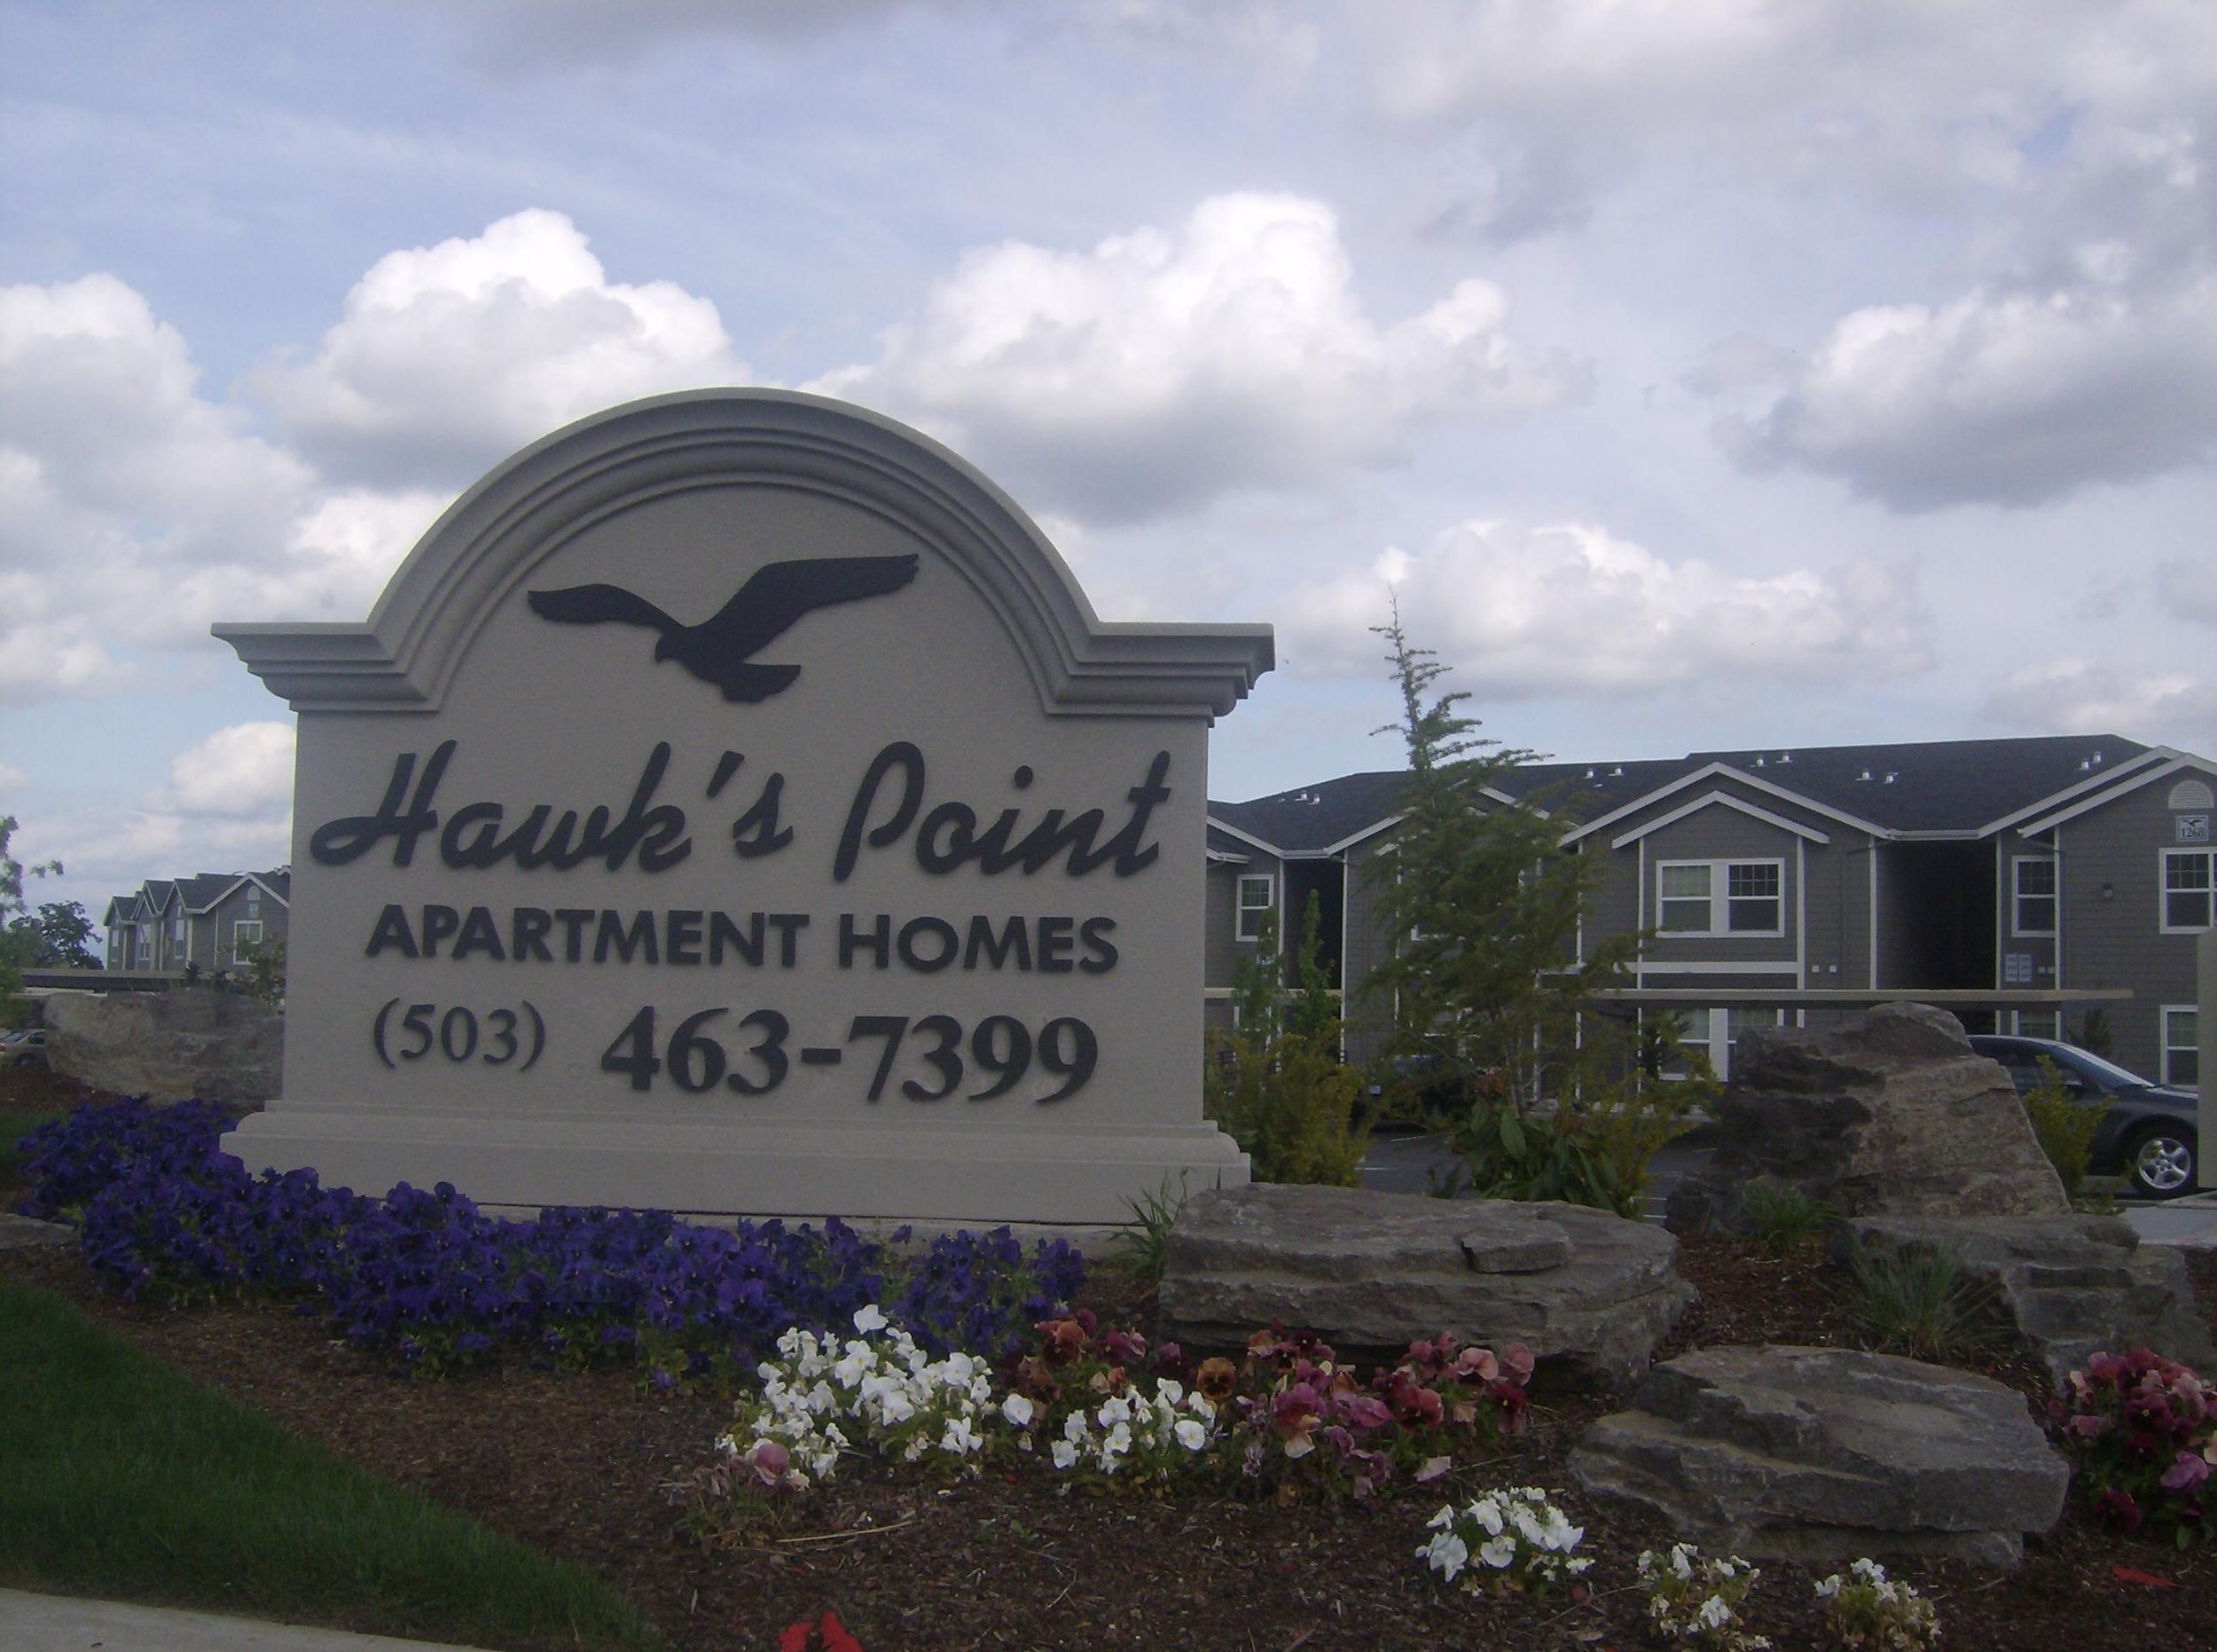 Hawk's Point Apartment Homes